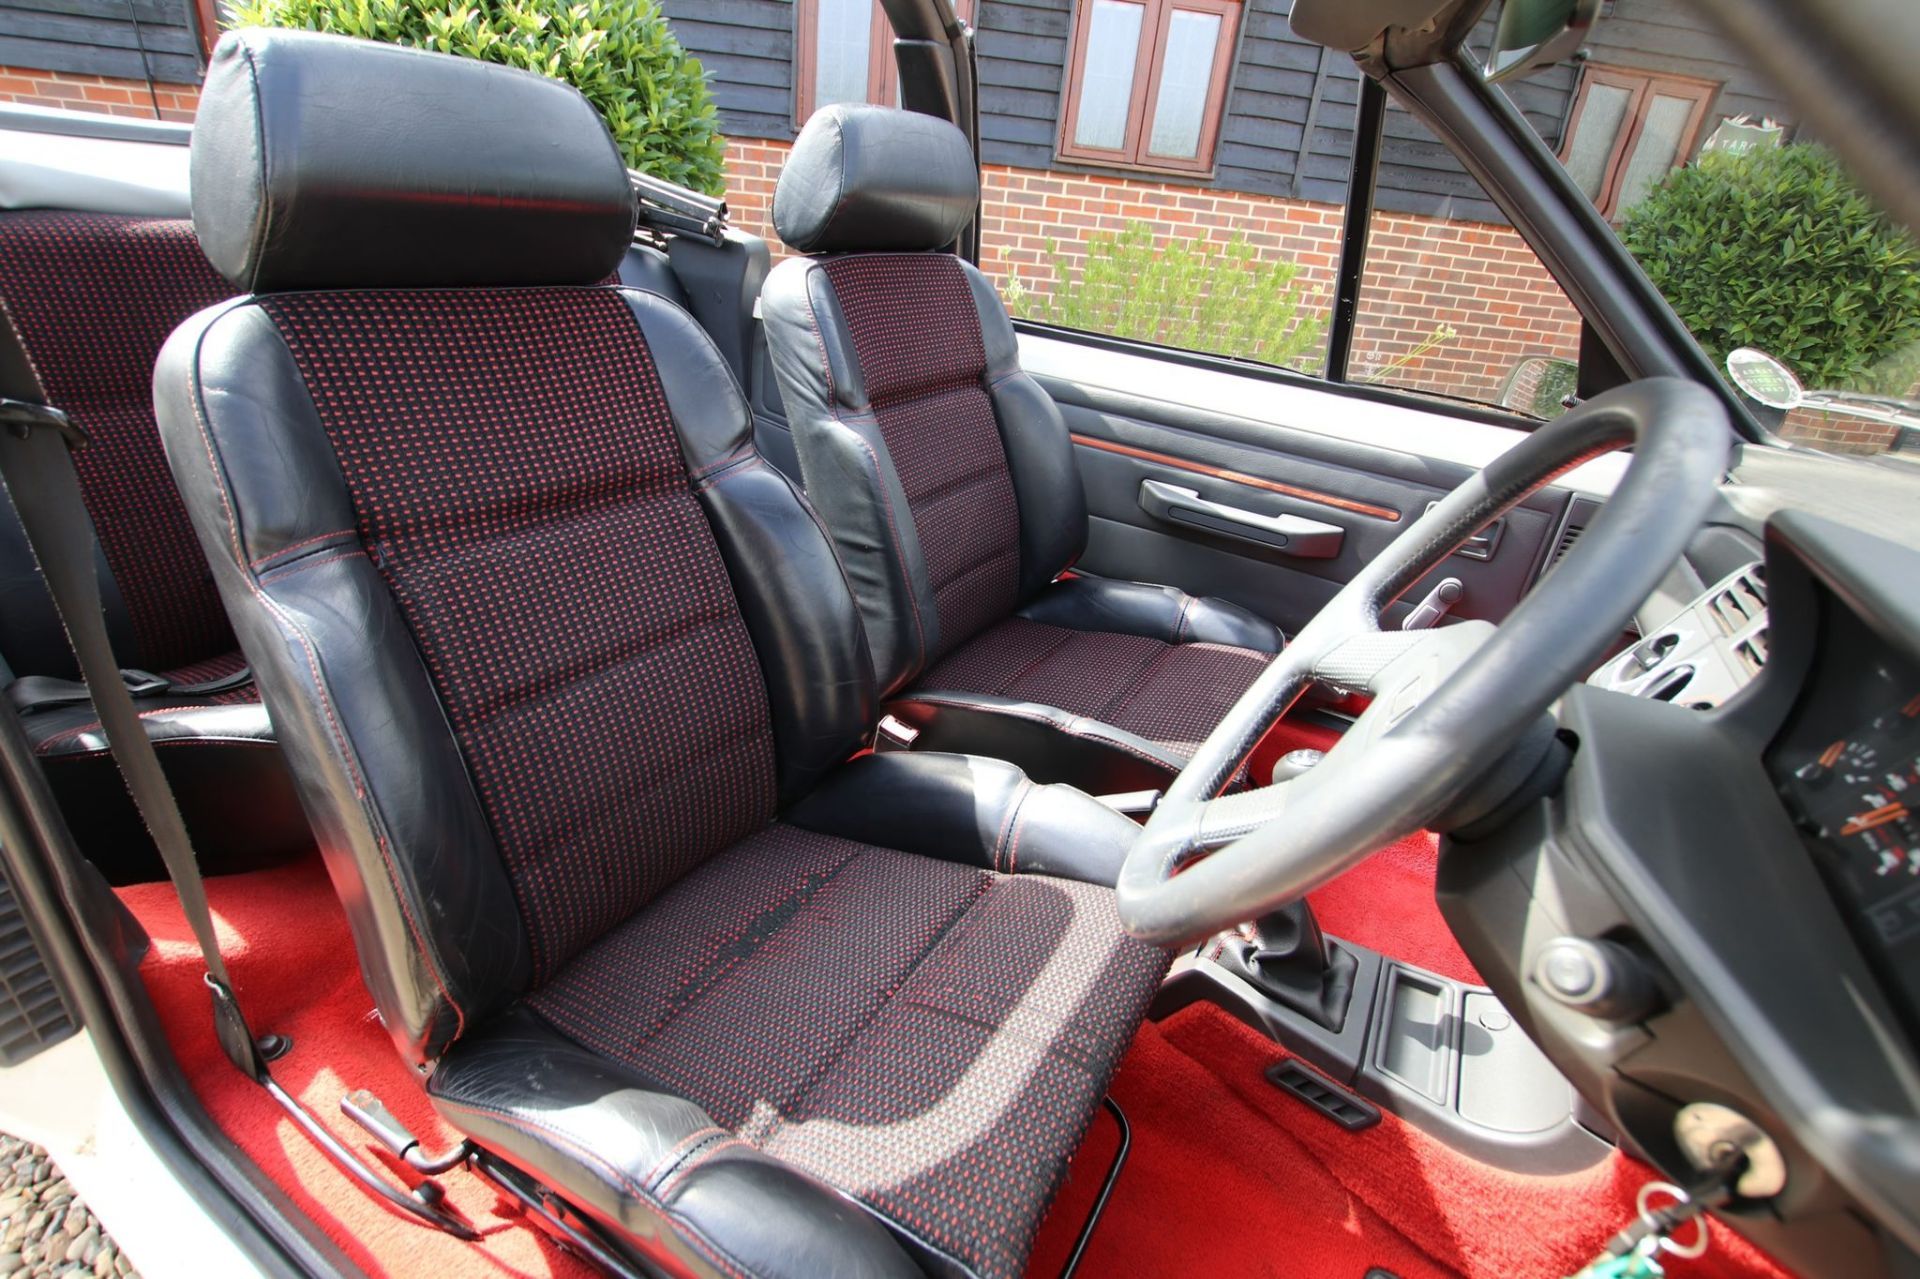 1989 PEUGEOT 205 CTI CABRIOLET CONVERTIBLE, 115hp, 1590cc PETROL ENGINE - OVER 30 SERVICES RECORDED - Image 10 of 12